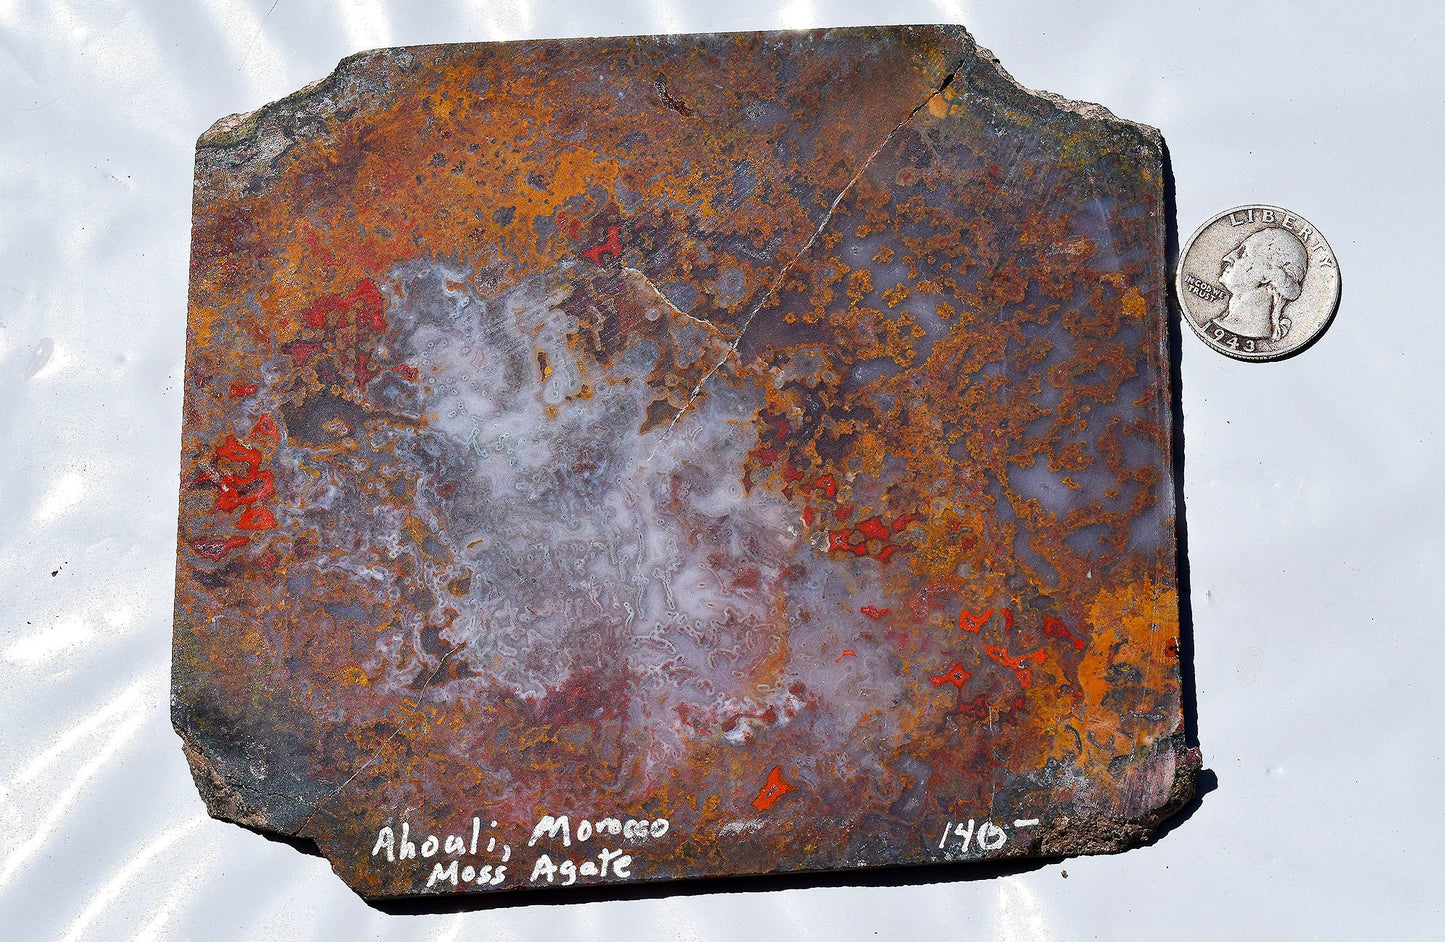 Rare, multi-colored moss agate from the Ahouli beds in Morocco. #5